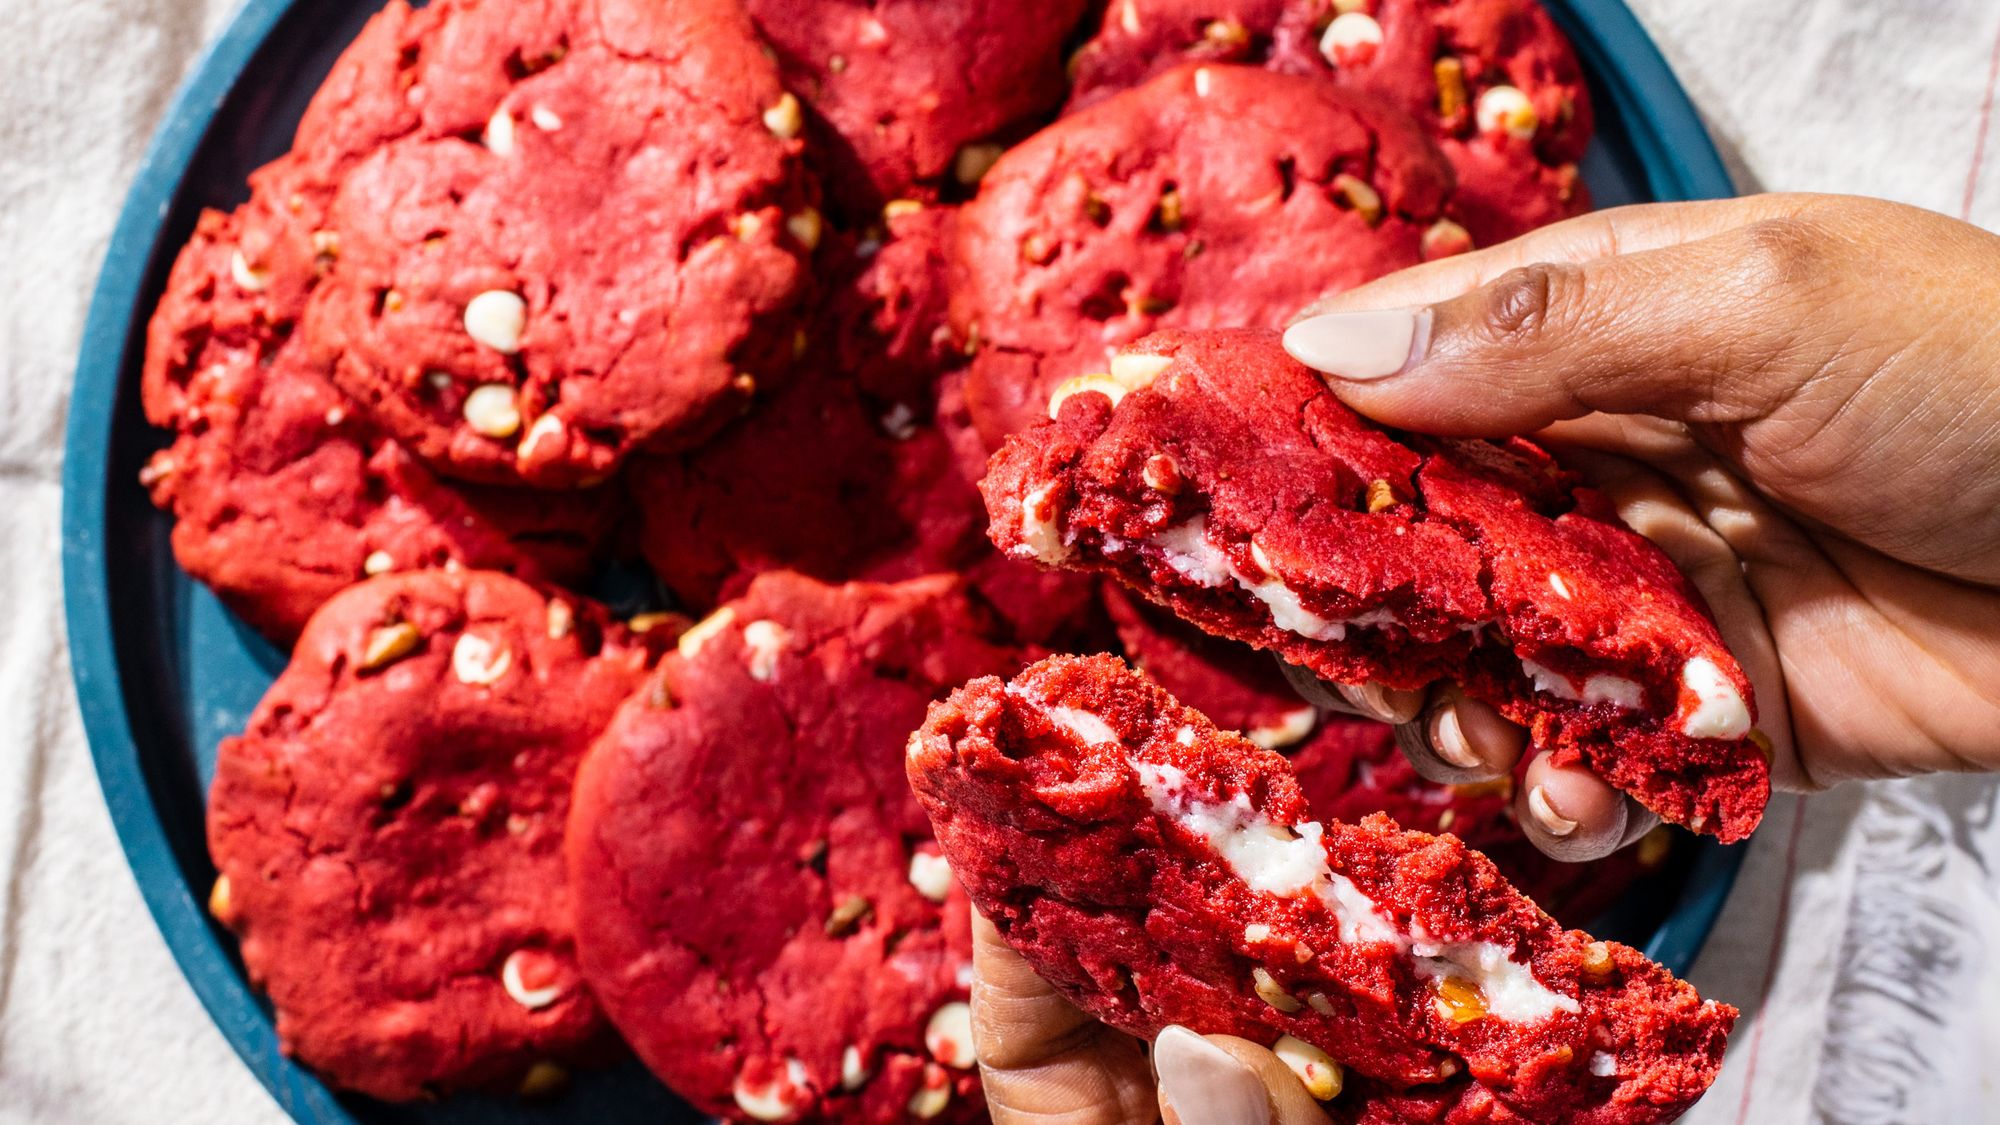 Red velvet cake in cookie form? Yes, please!